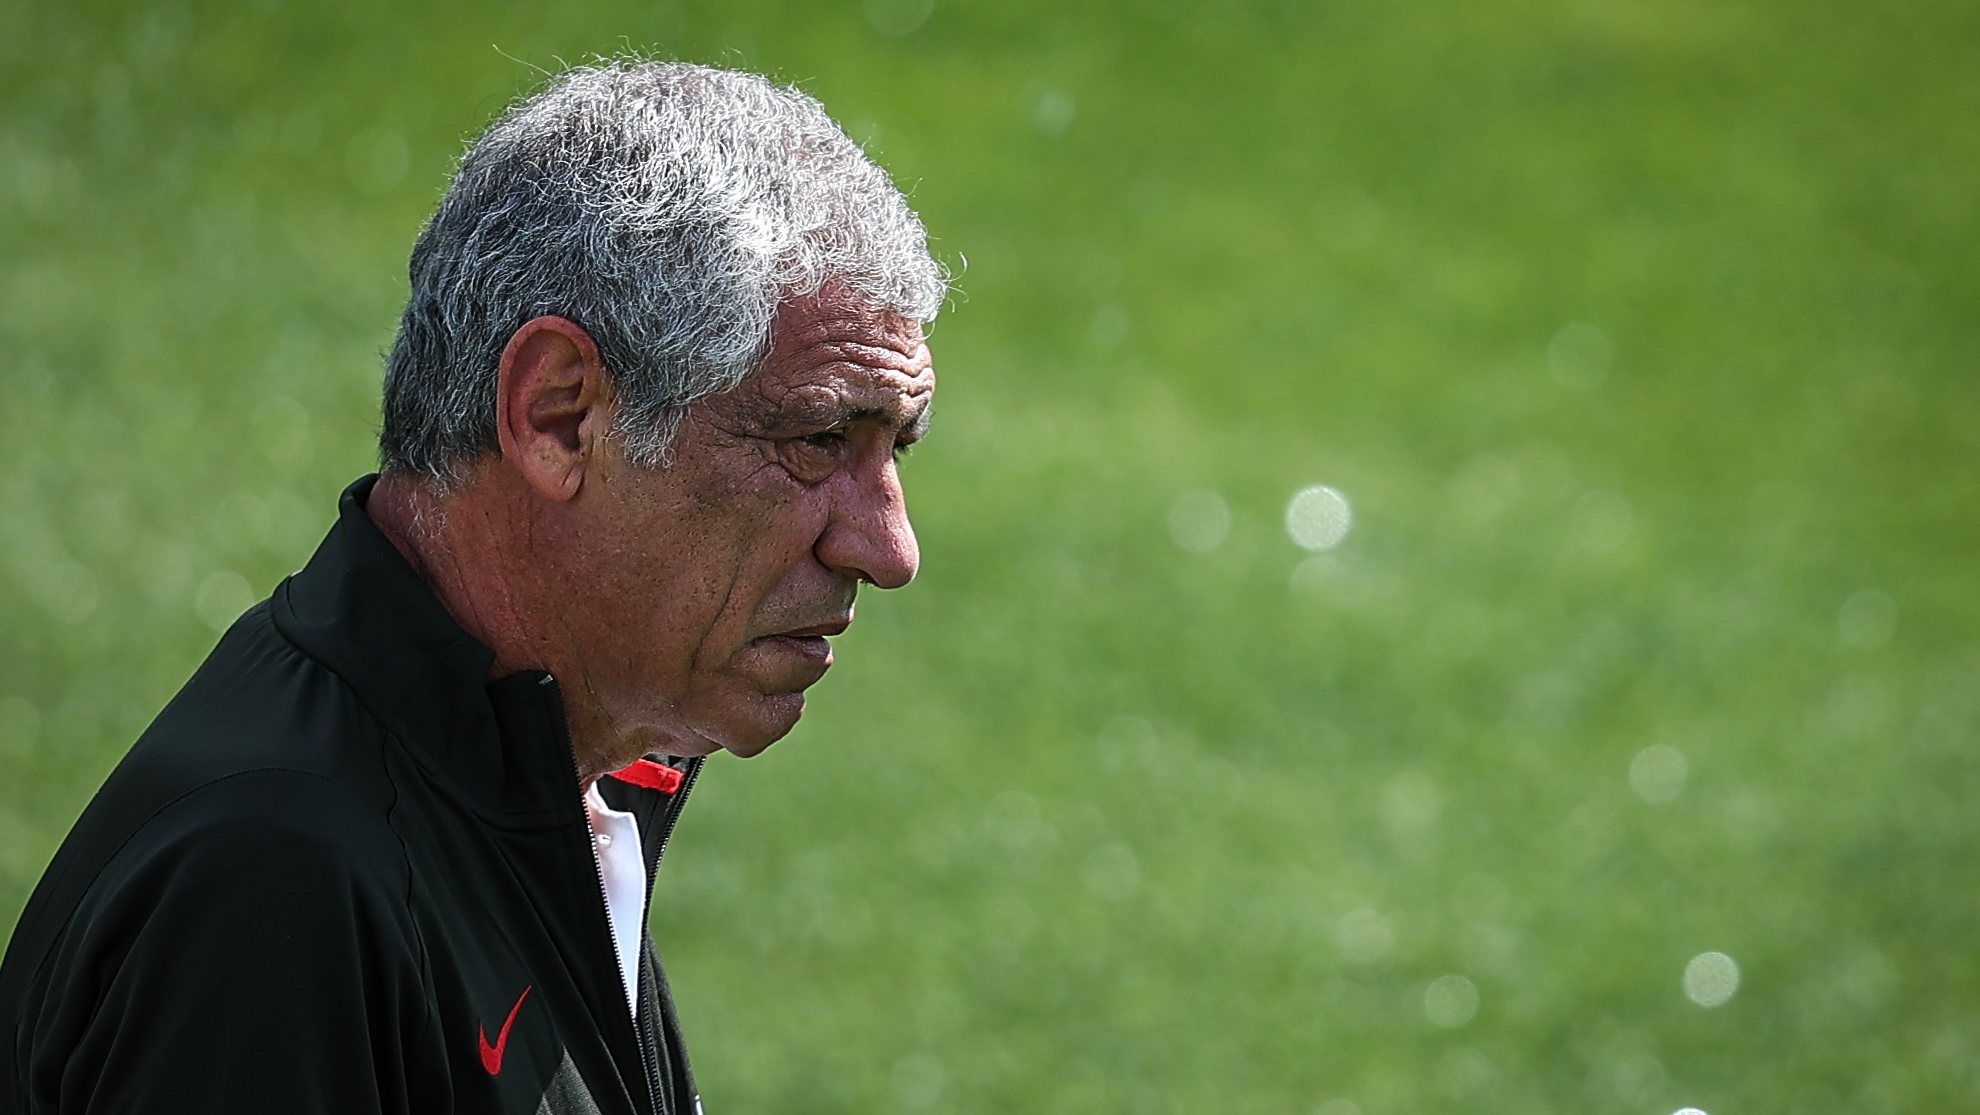 Portugal soccer team head coach Fernando Santos leads a training session at Cidade do Futebol in Oeiras, outskirts of Lisbon, Portugal, 08 June 2022. Portugal will play against the Czech Republic on 09th June and Switzerland on 12th June for the upcoming UEFA Nations League. RODRIGO ANTUNES/LUSA